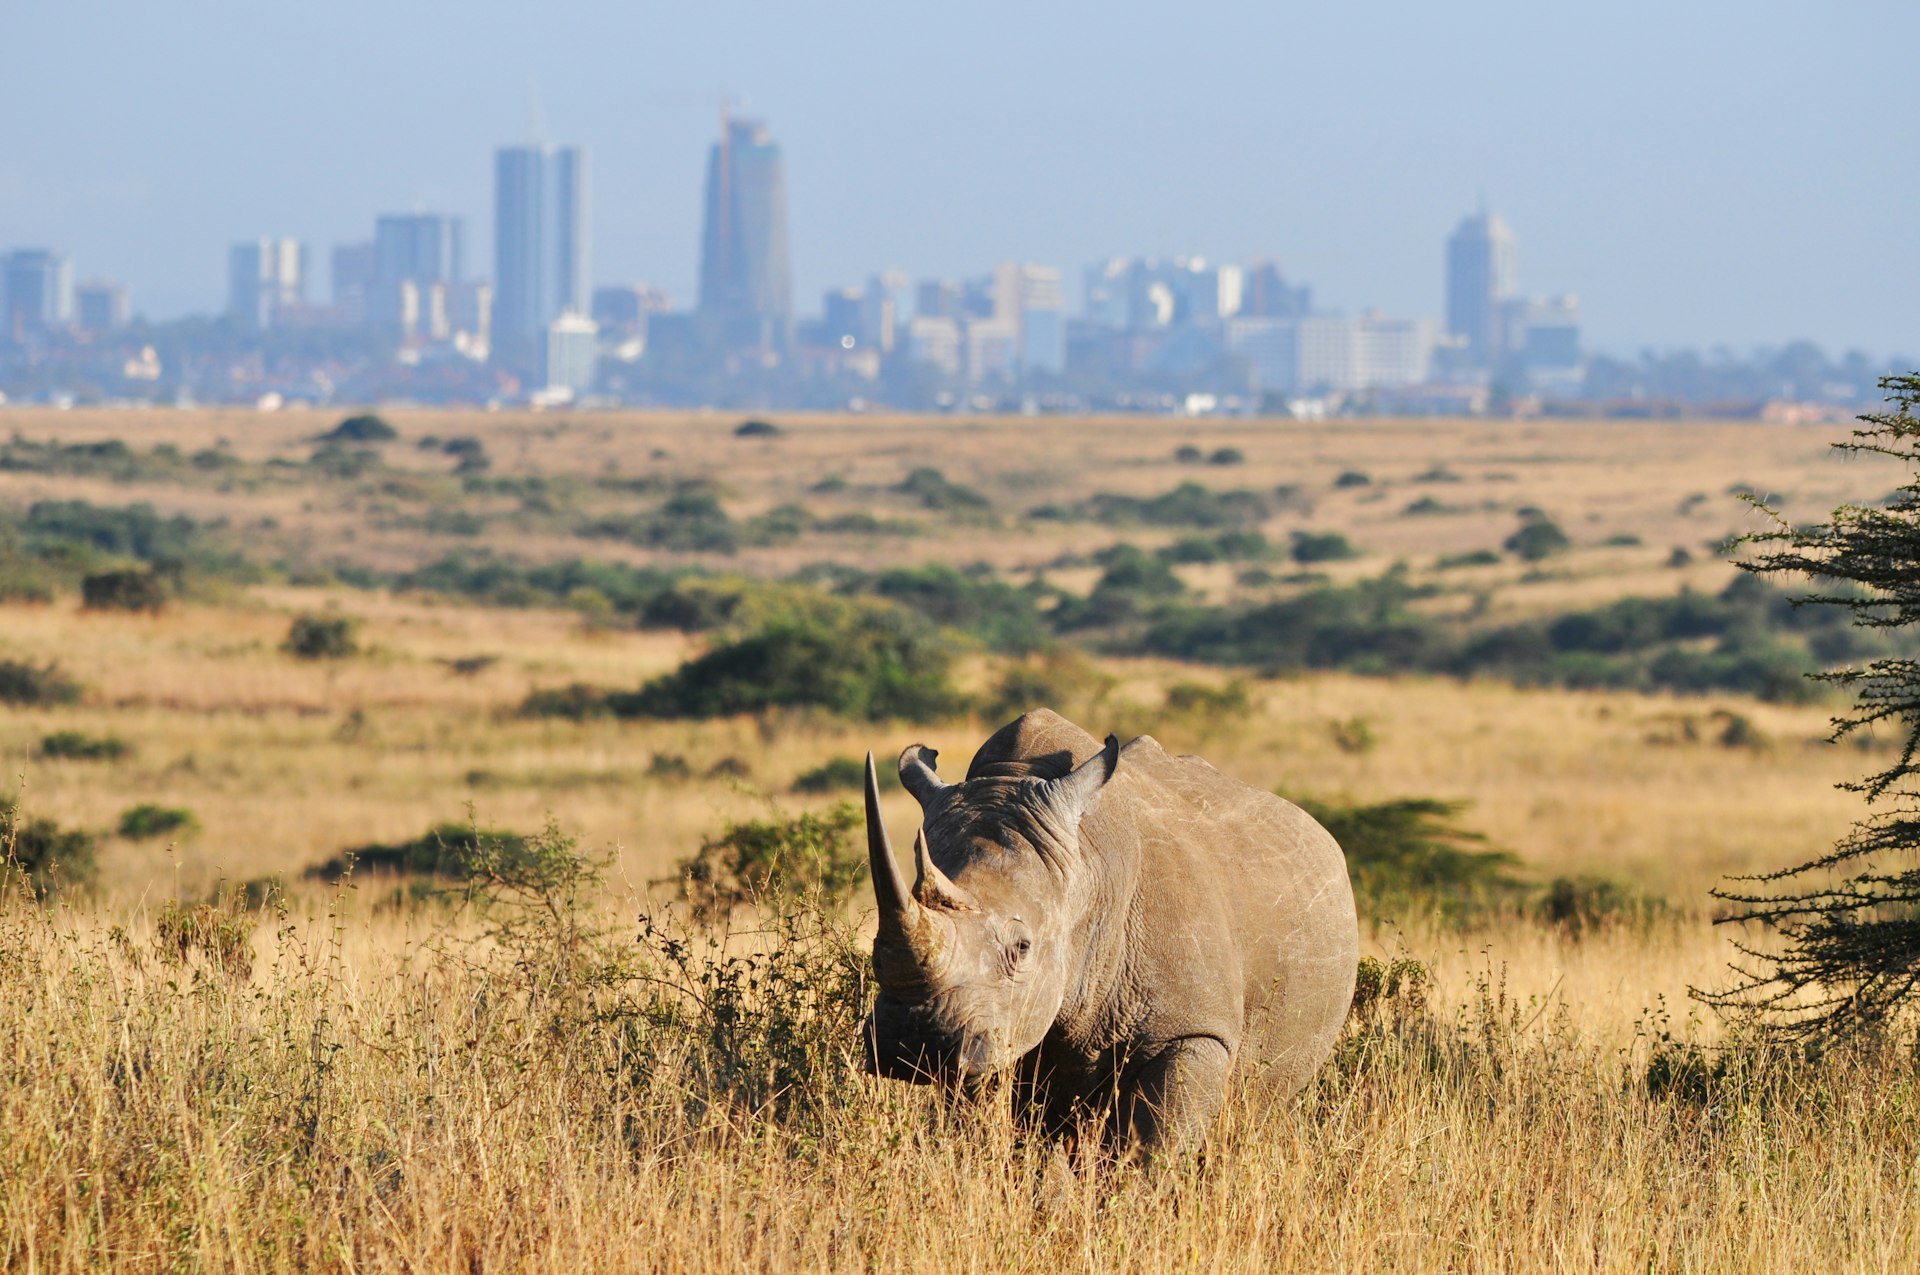 A Wild Rhinoceros in the long grass of Nairobi National Park with the city skyline in the background